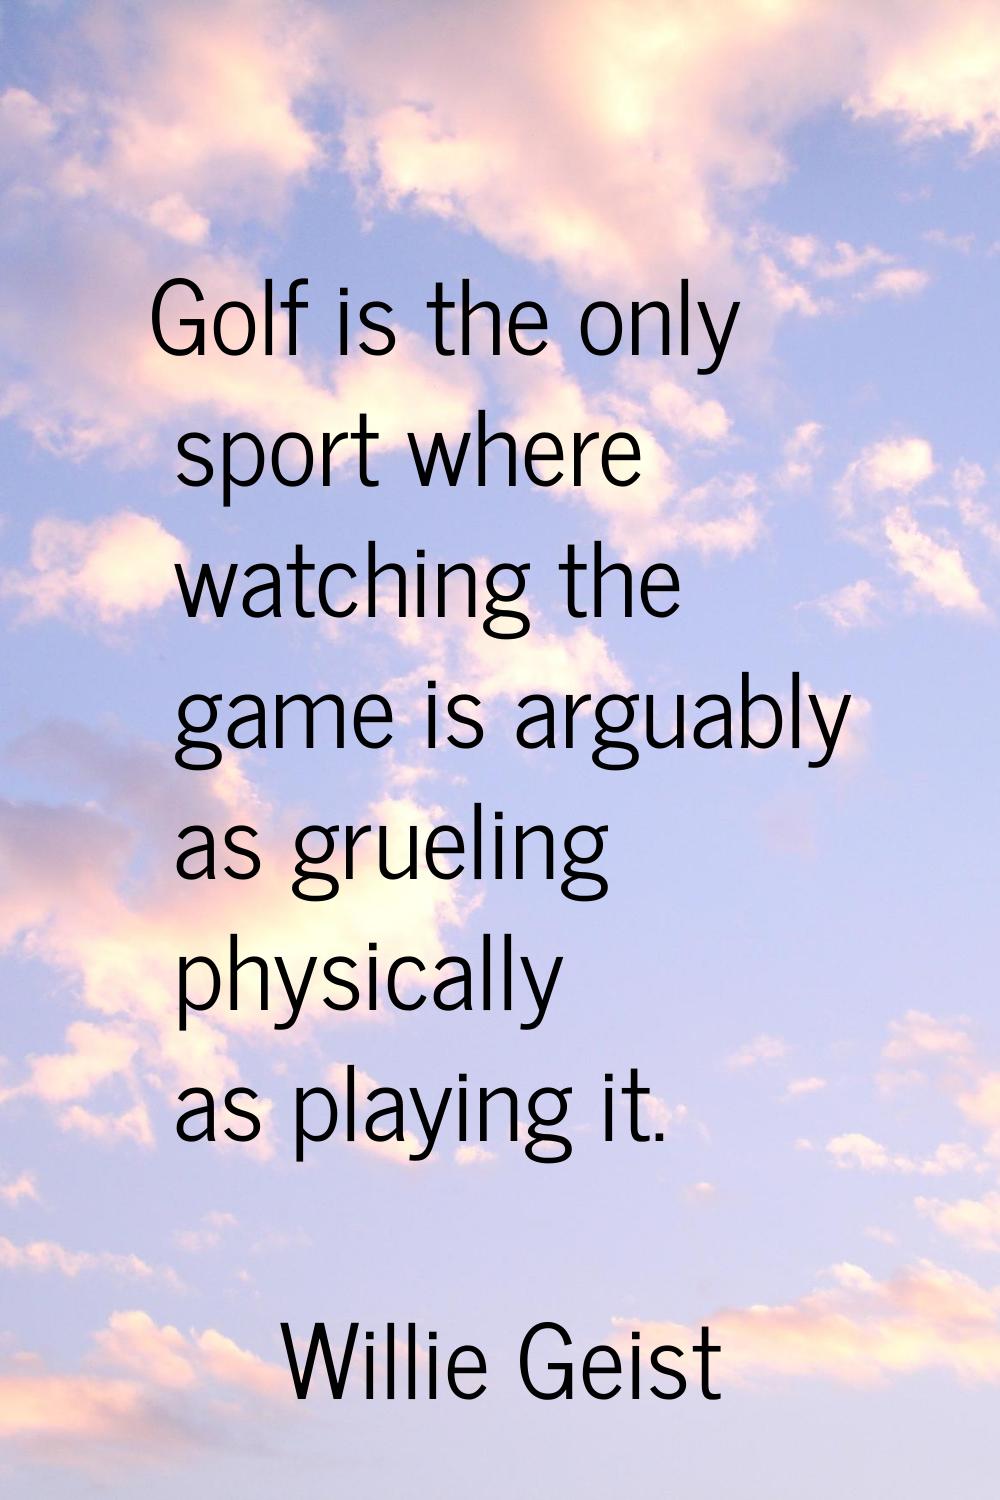 Golf is the only sport where watching the game is arguably as grueling physically as playing it.